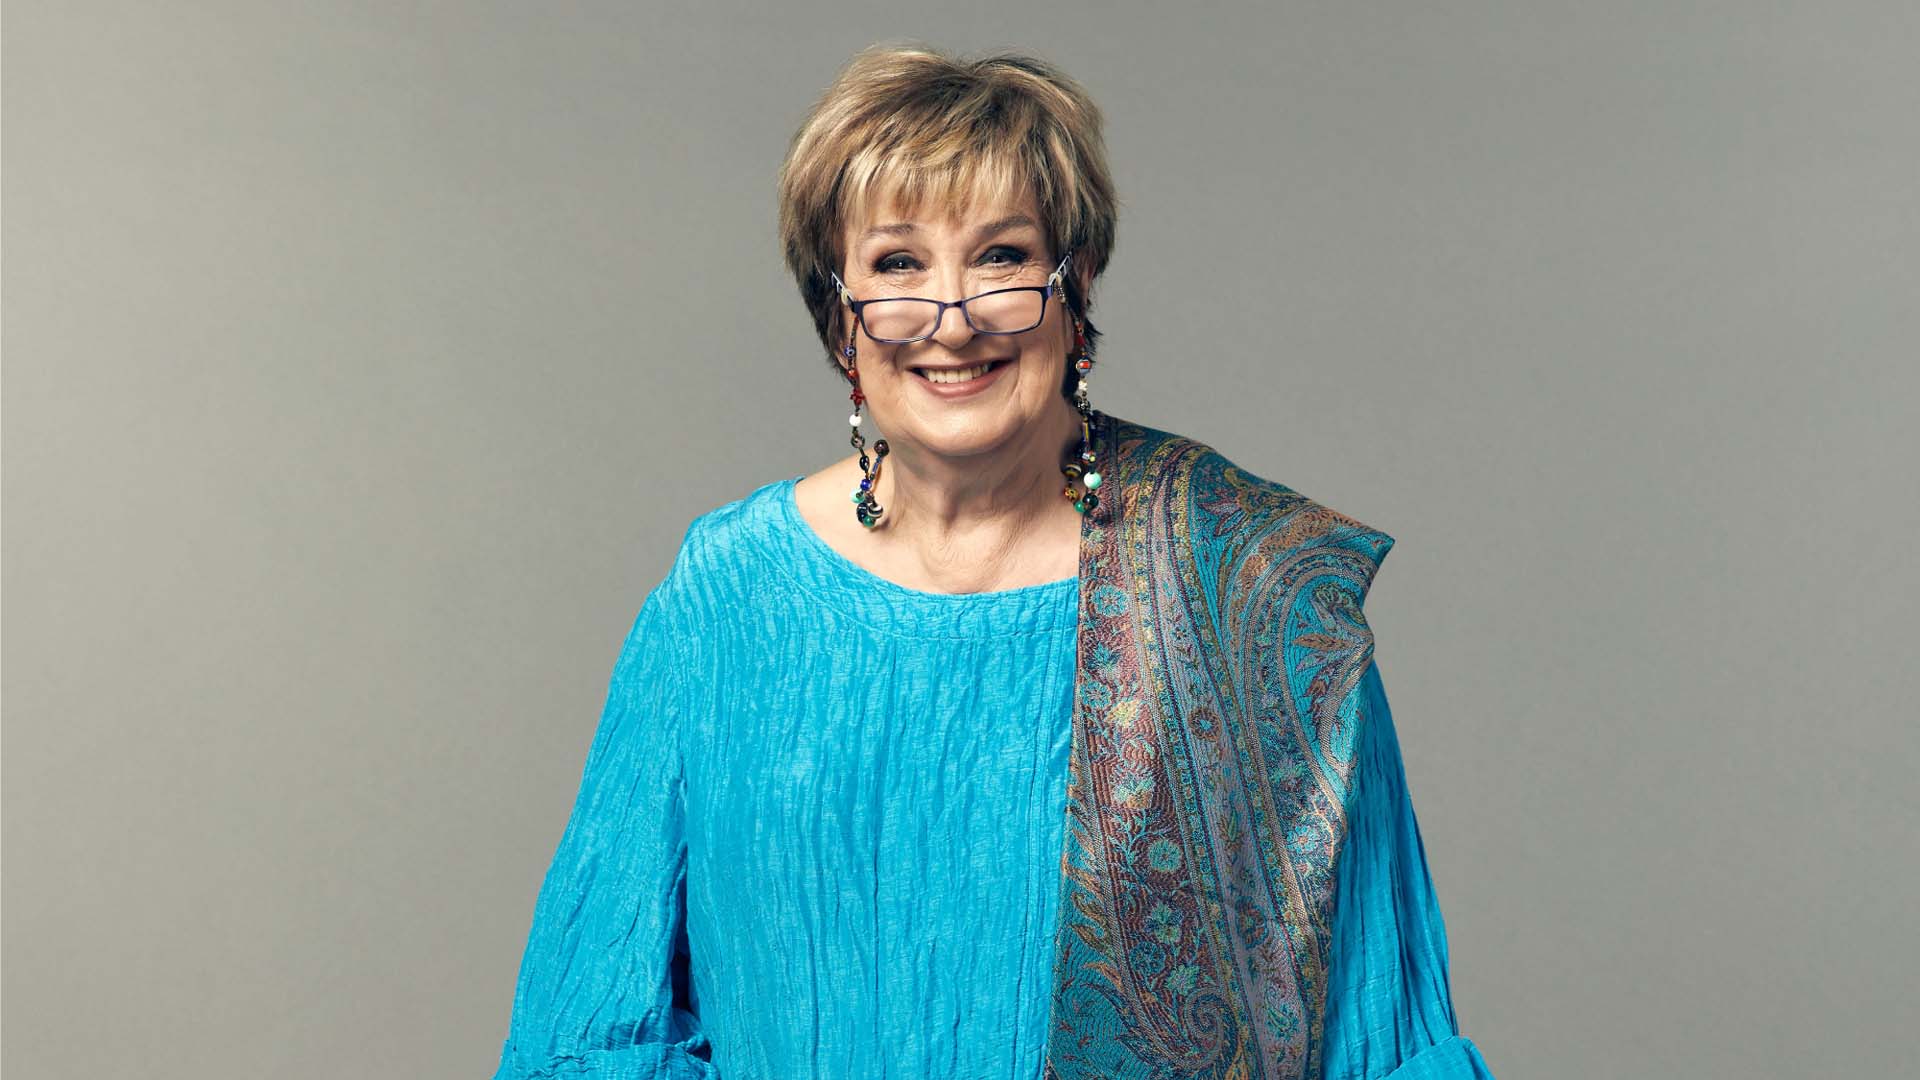 Head and shoulders colour photo of Jenni Murray